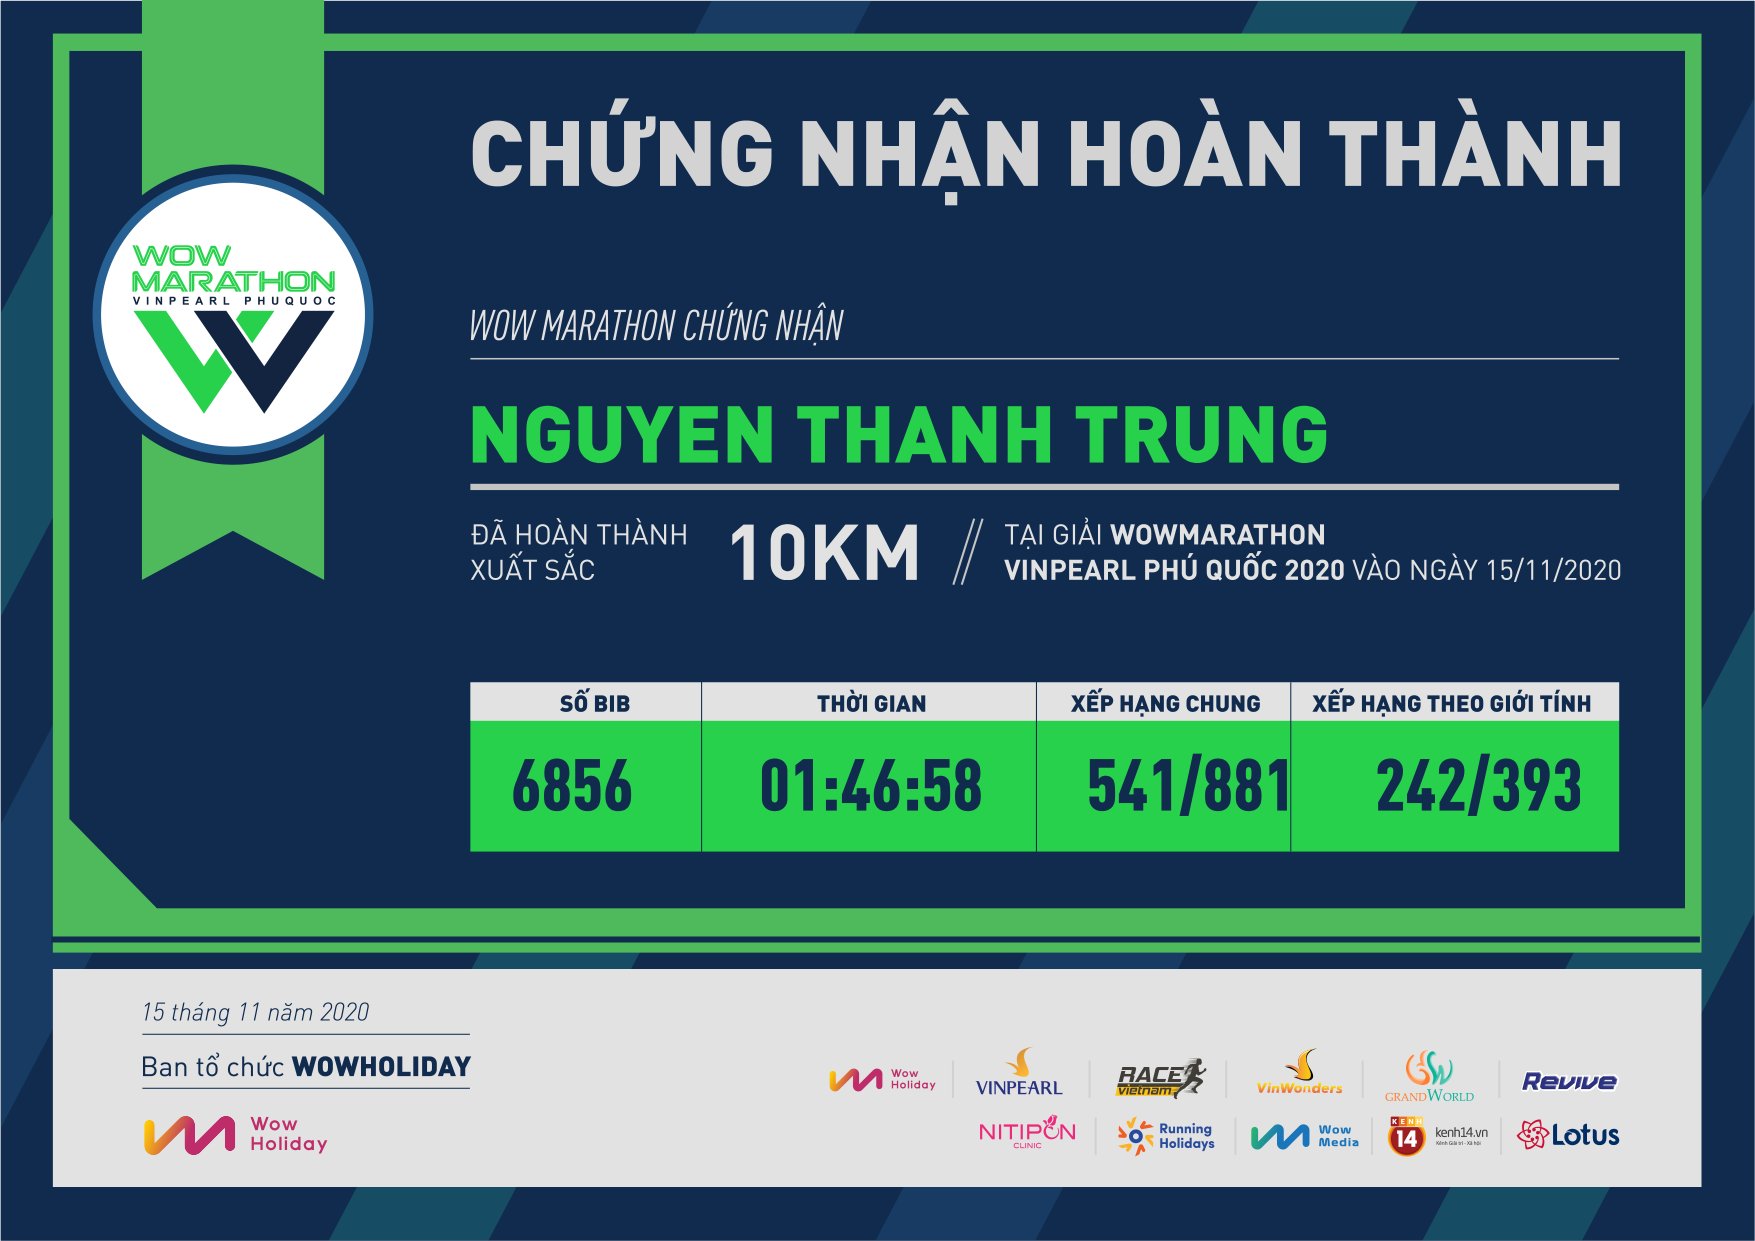 6856 - Nguyen Thanh Trung